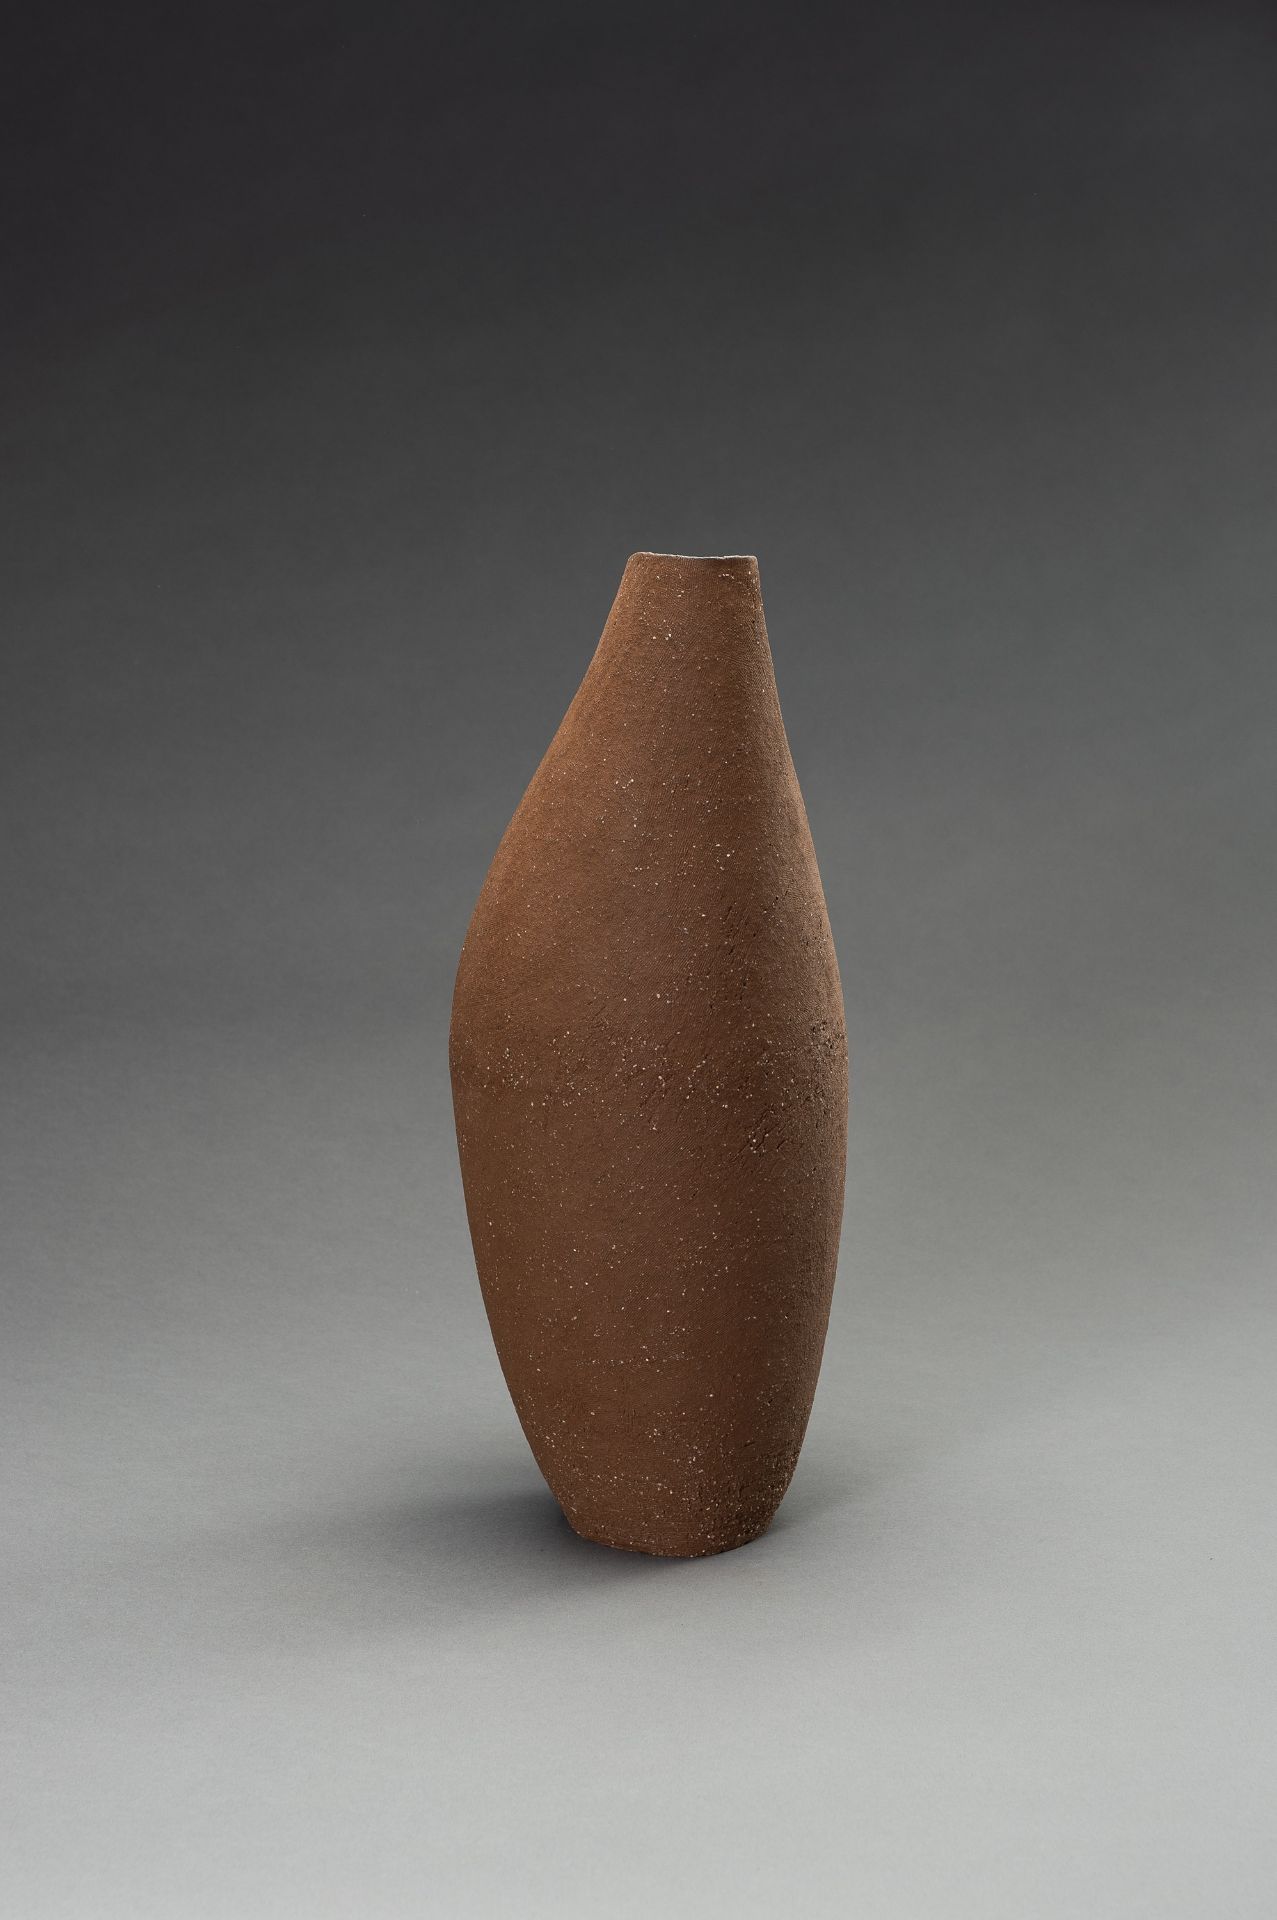 MASA TOSHI: A CONTEMPORARY LACQUERED CERAMIC VASE - Image 5 of 11